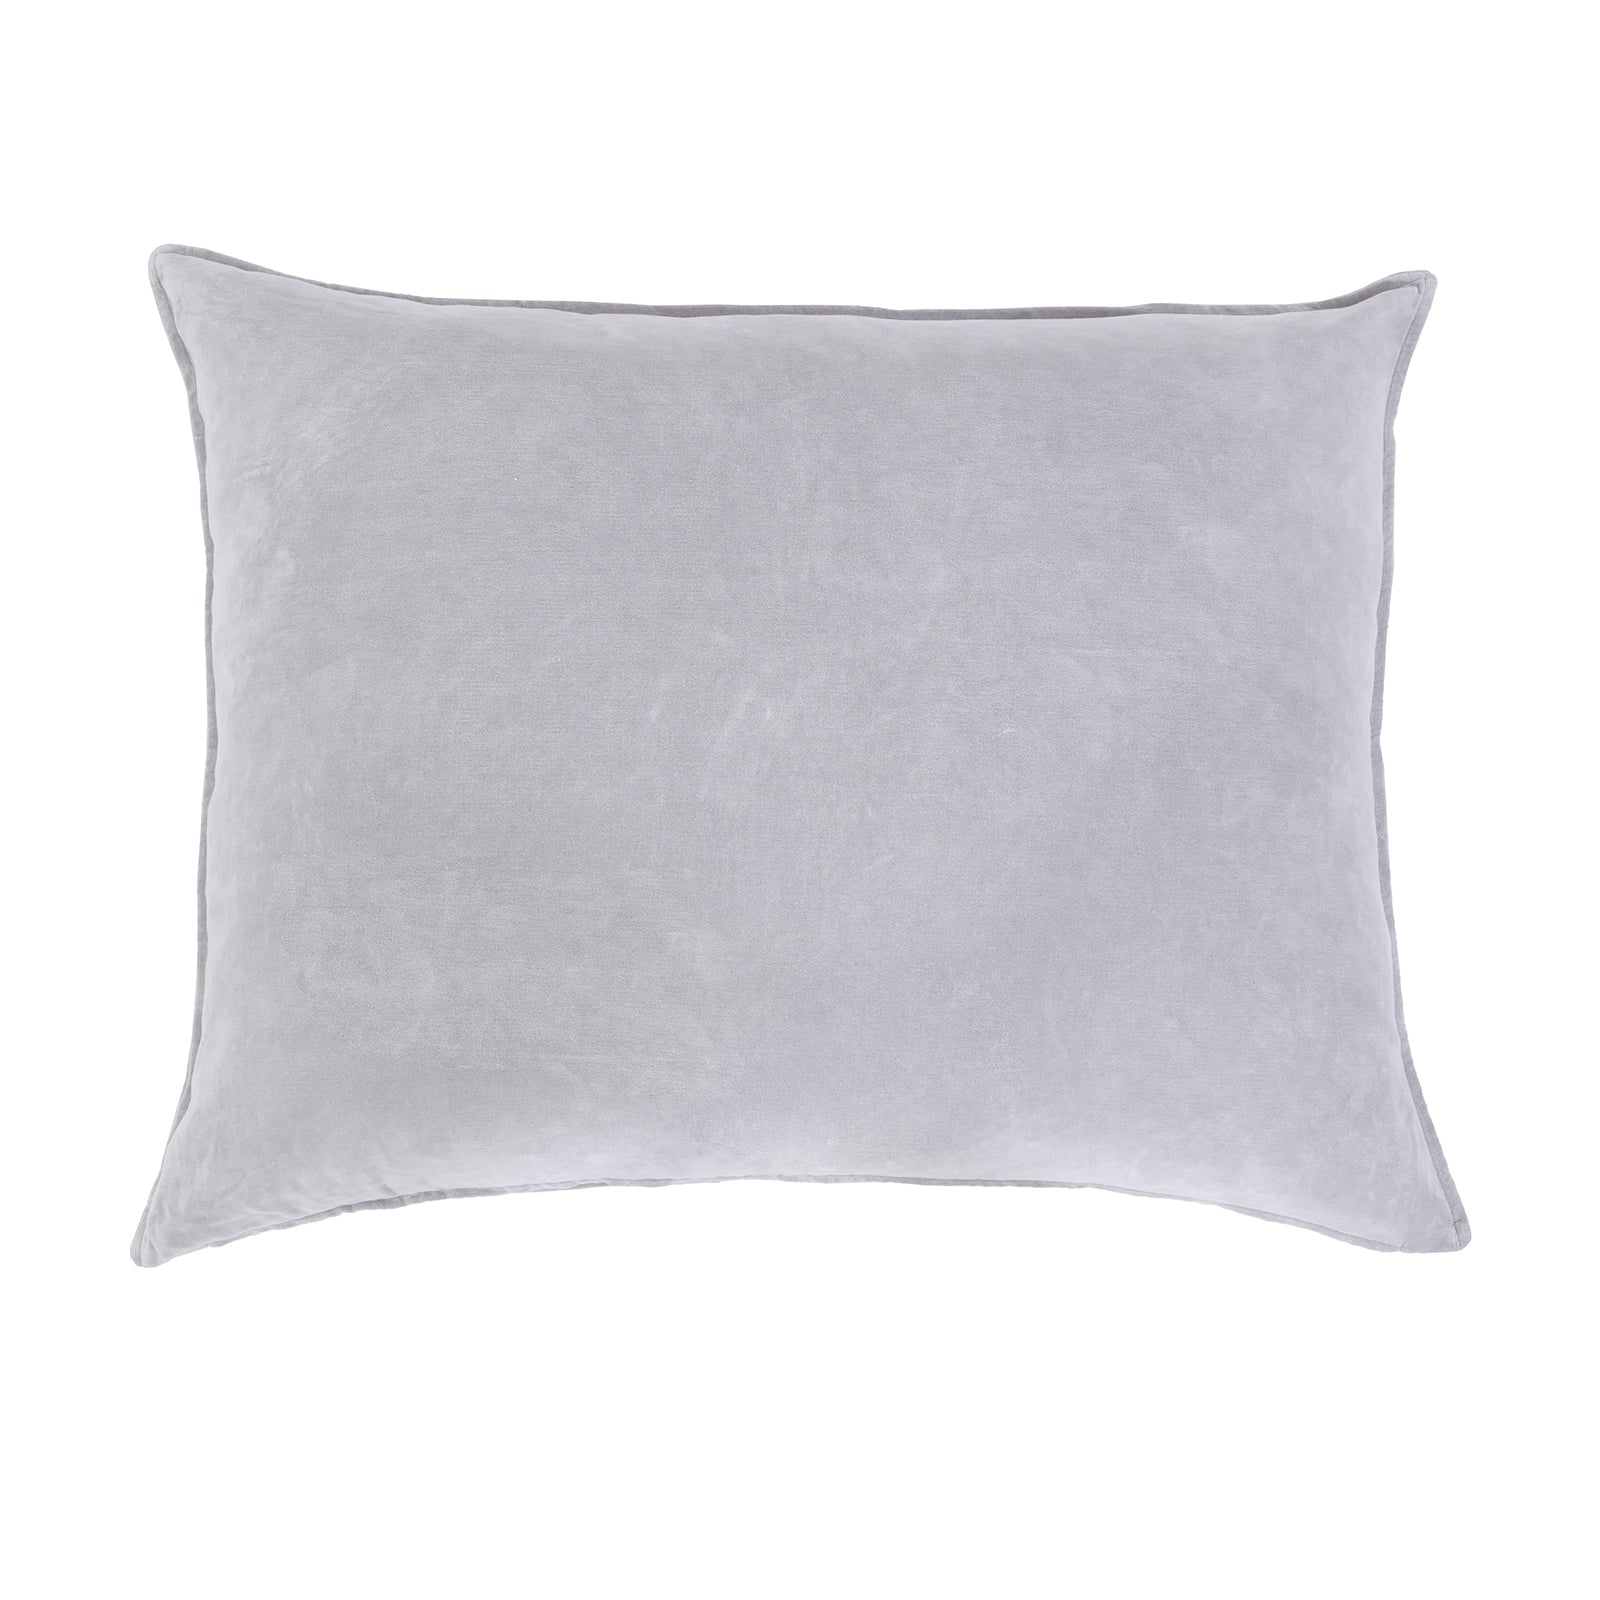 Bianca BIG PILLOW 28&quot; X 36&quot; WITH INSERT - Grey color - Pom pom At Home